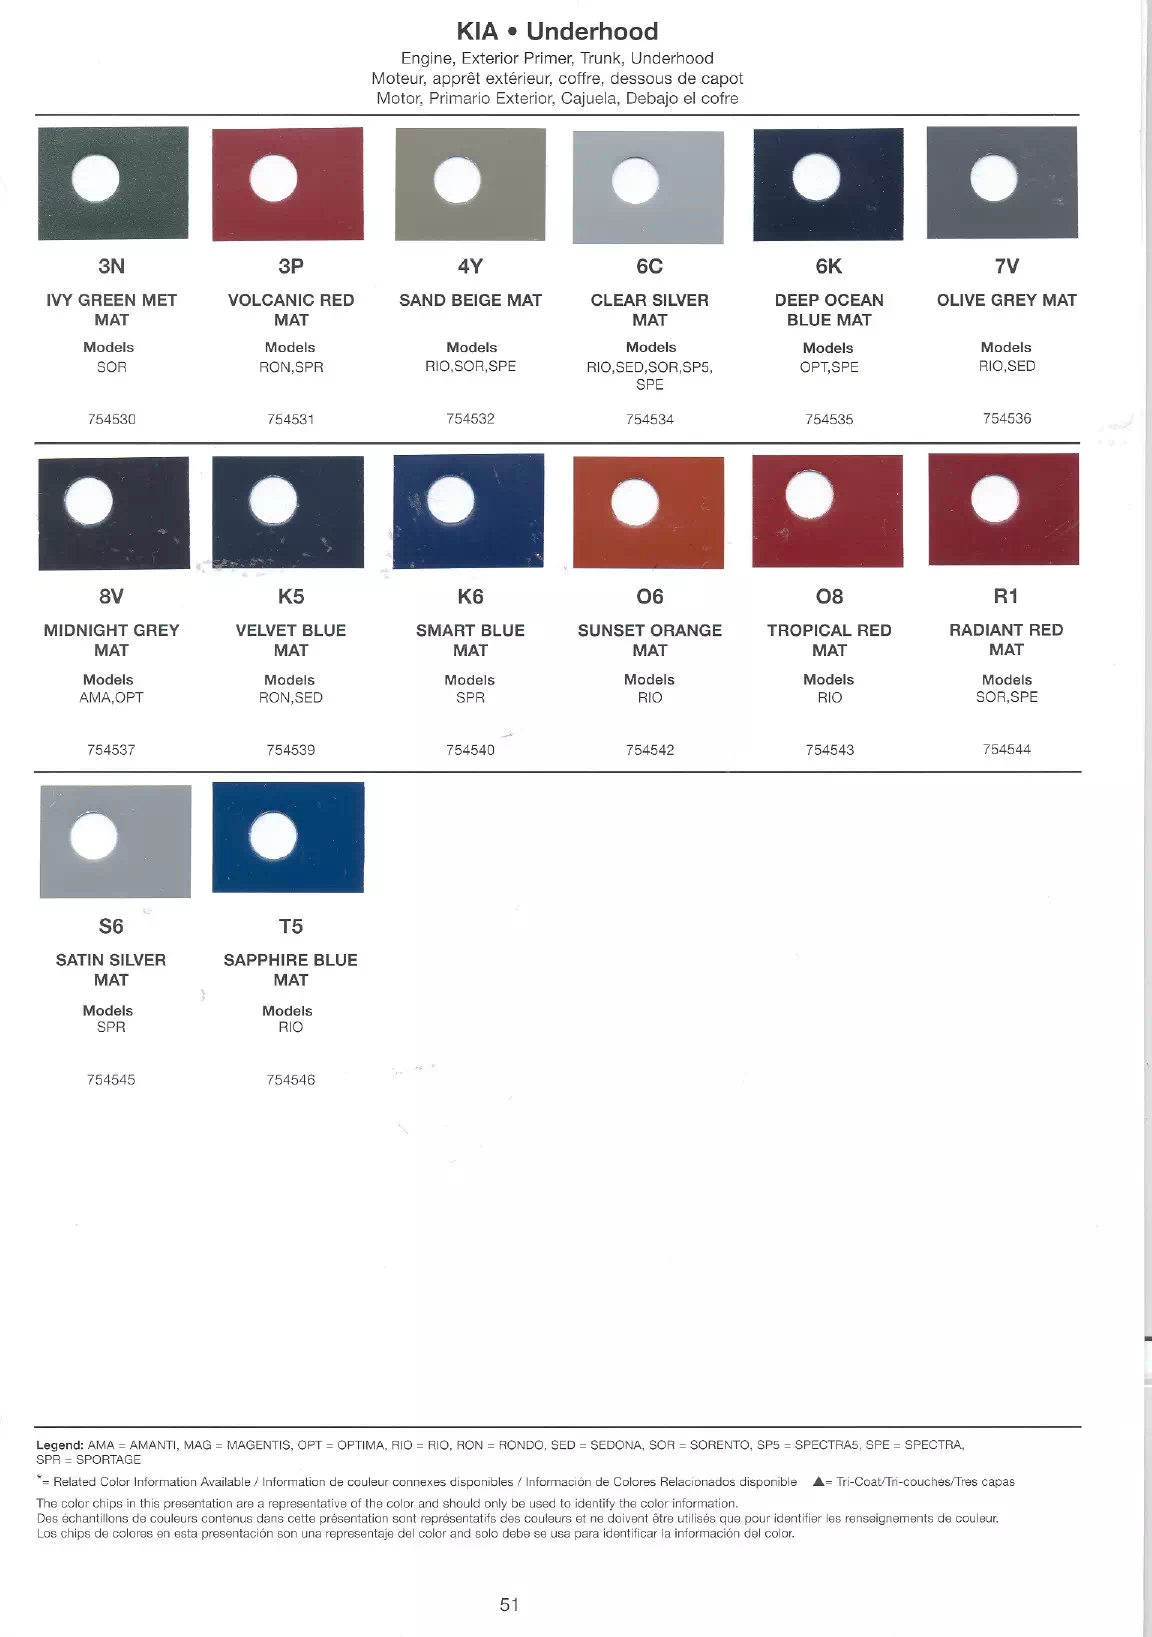 Exterior Paint Colors for Kia Vehicles in 2007